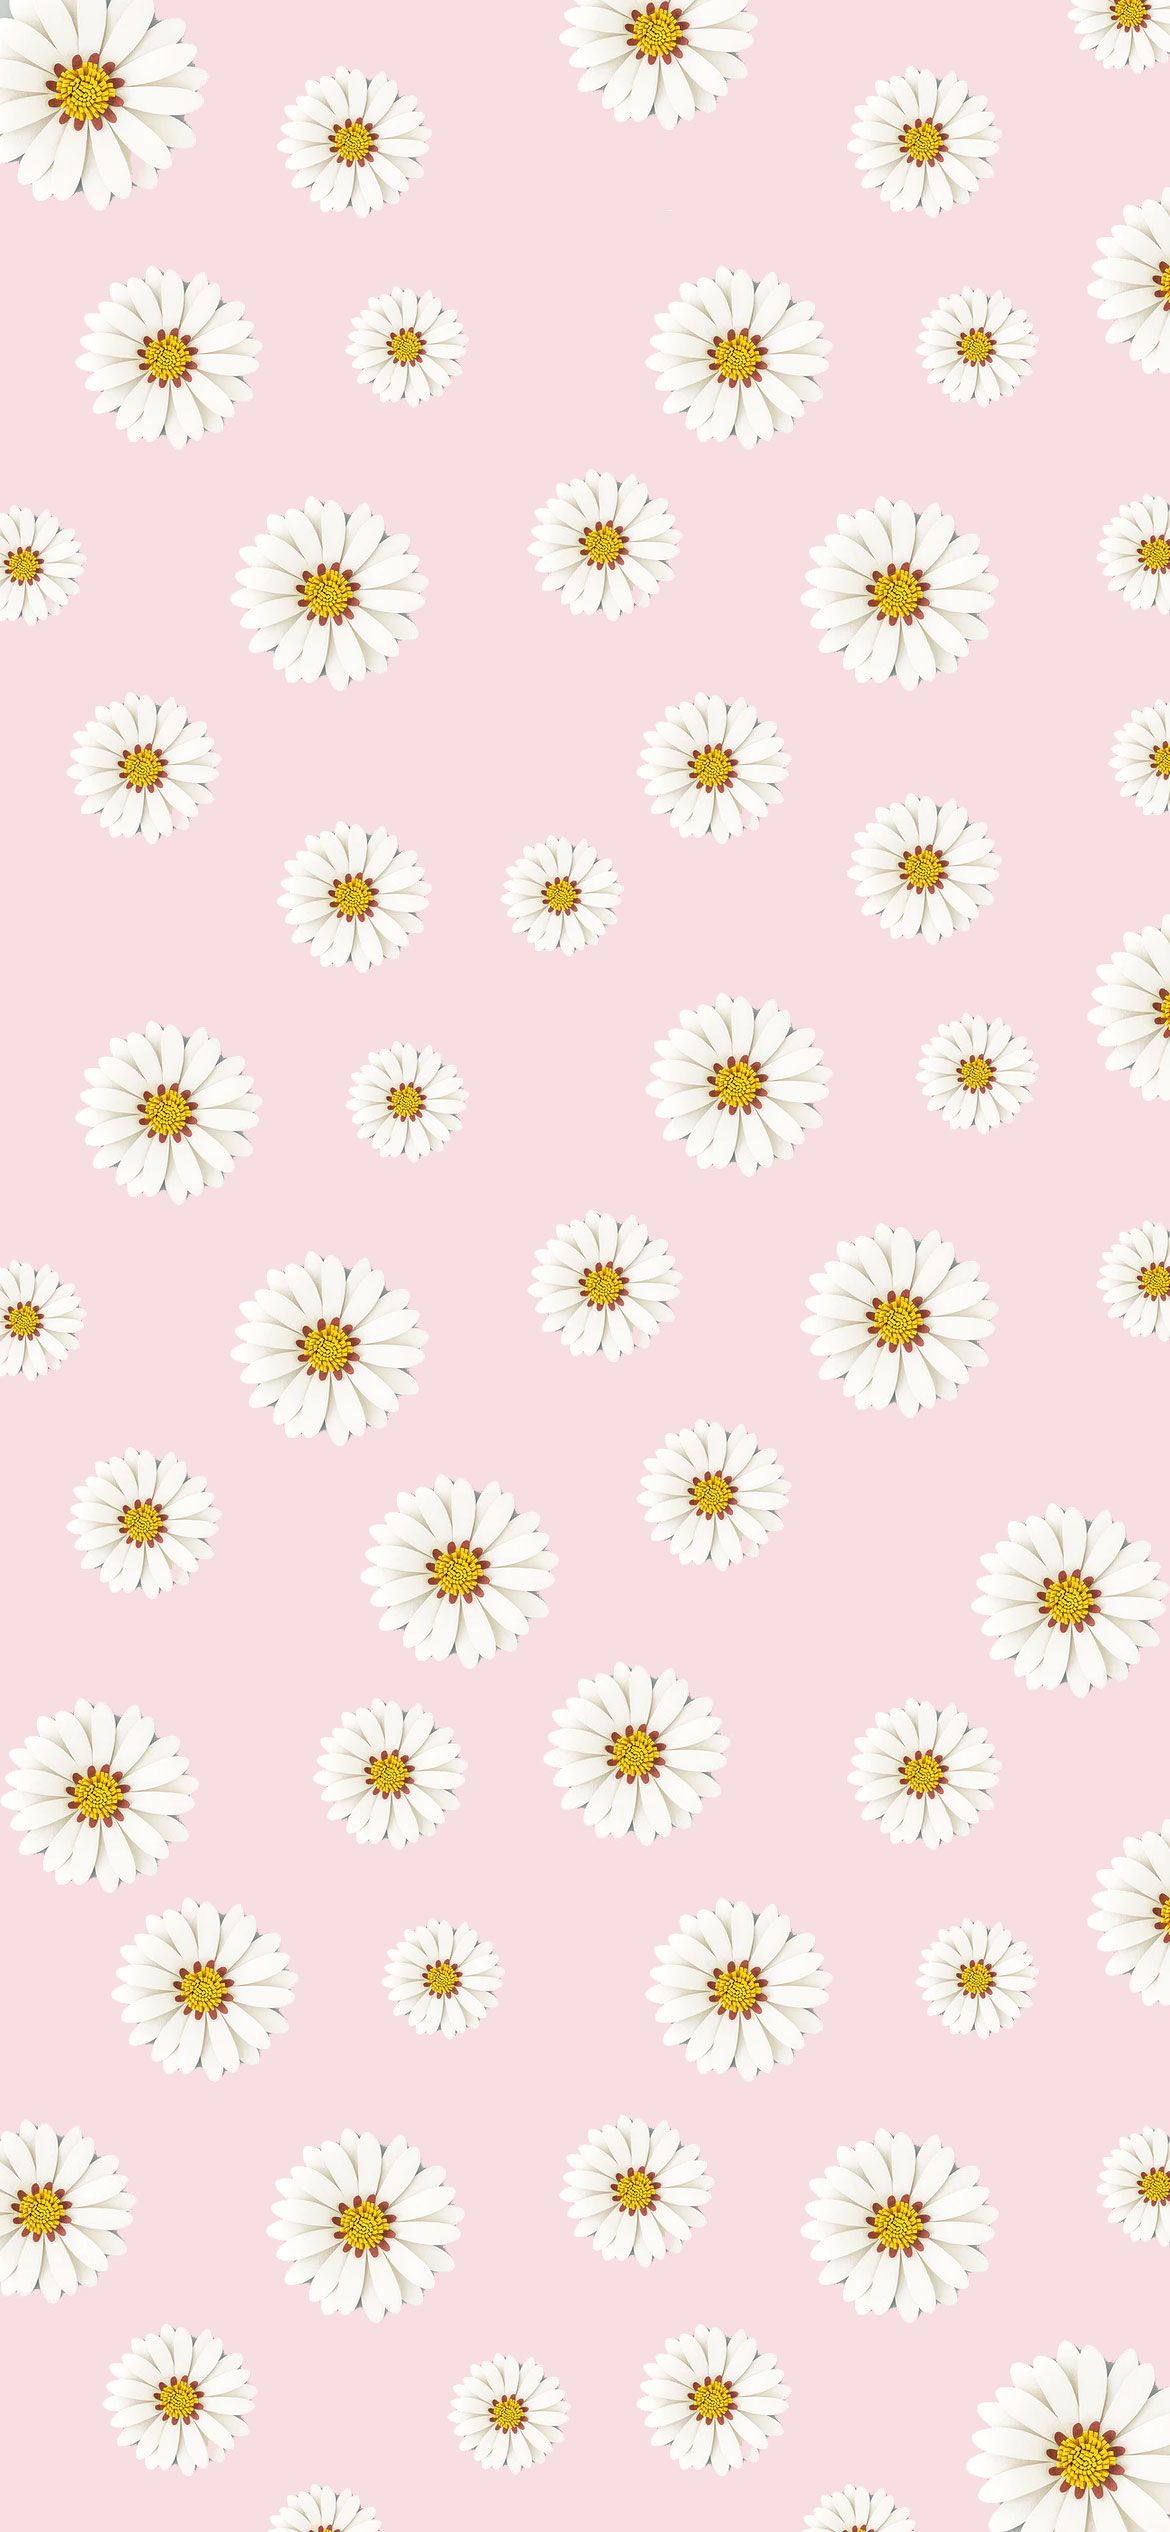 A pattern of white daisies on pink background - Pink phone, daisy